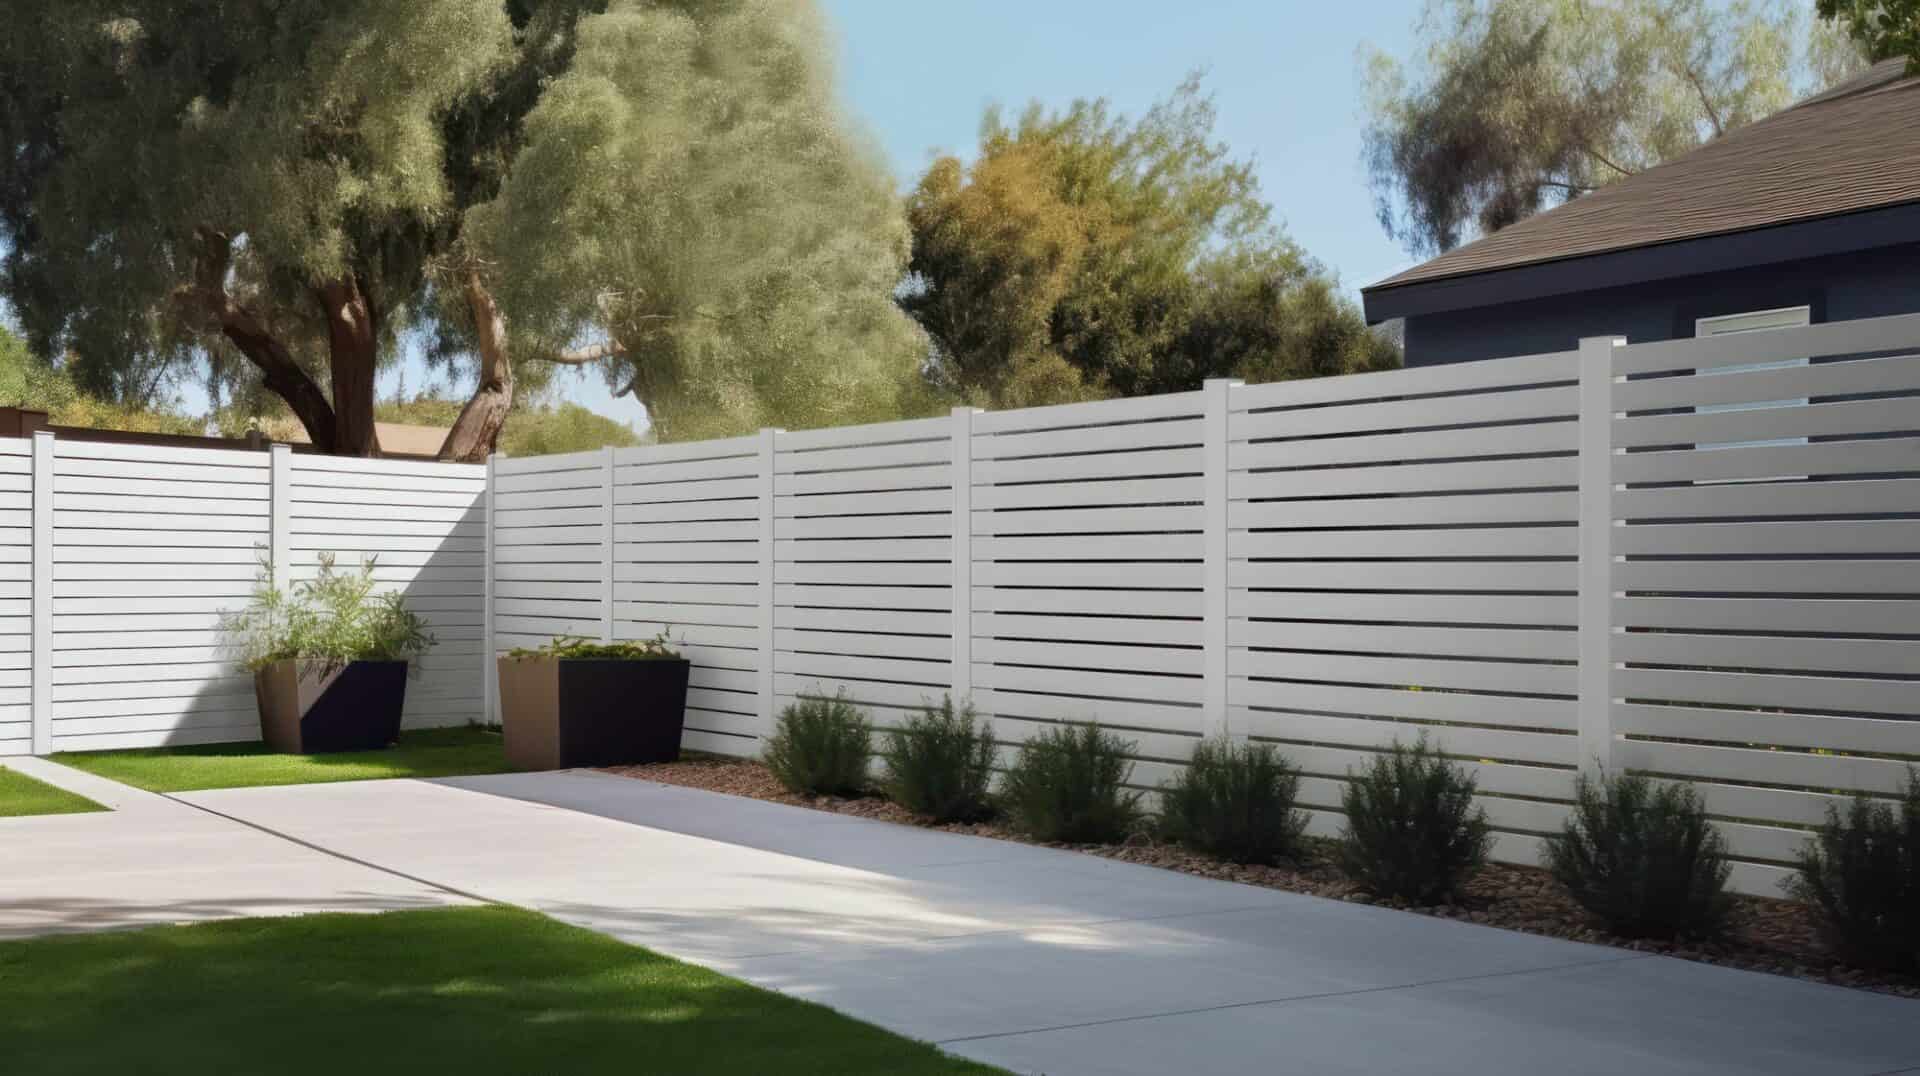 Vinyl semi-privacy fence & potted plants with concrete walkway on grassy lawn with trees in the background.